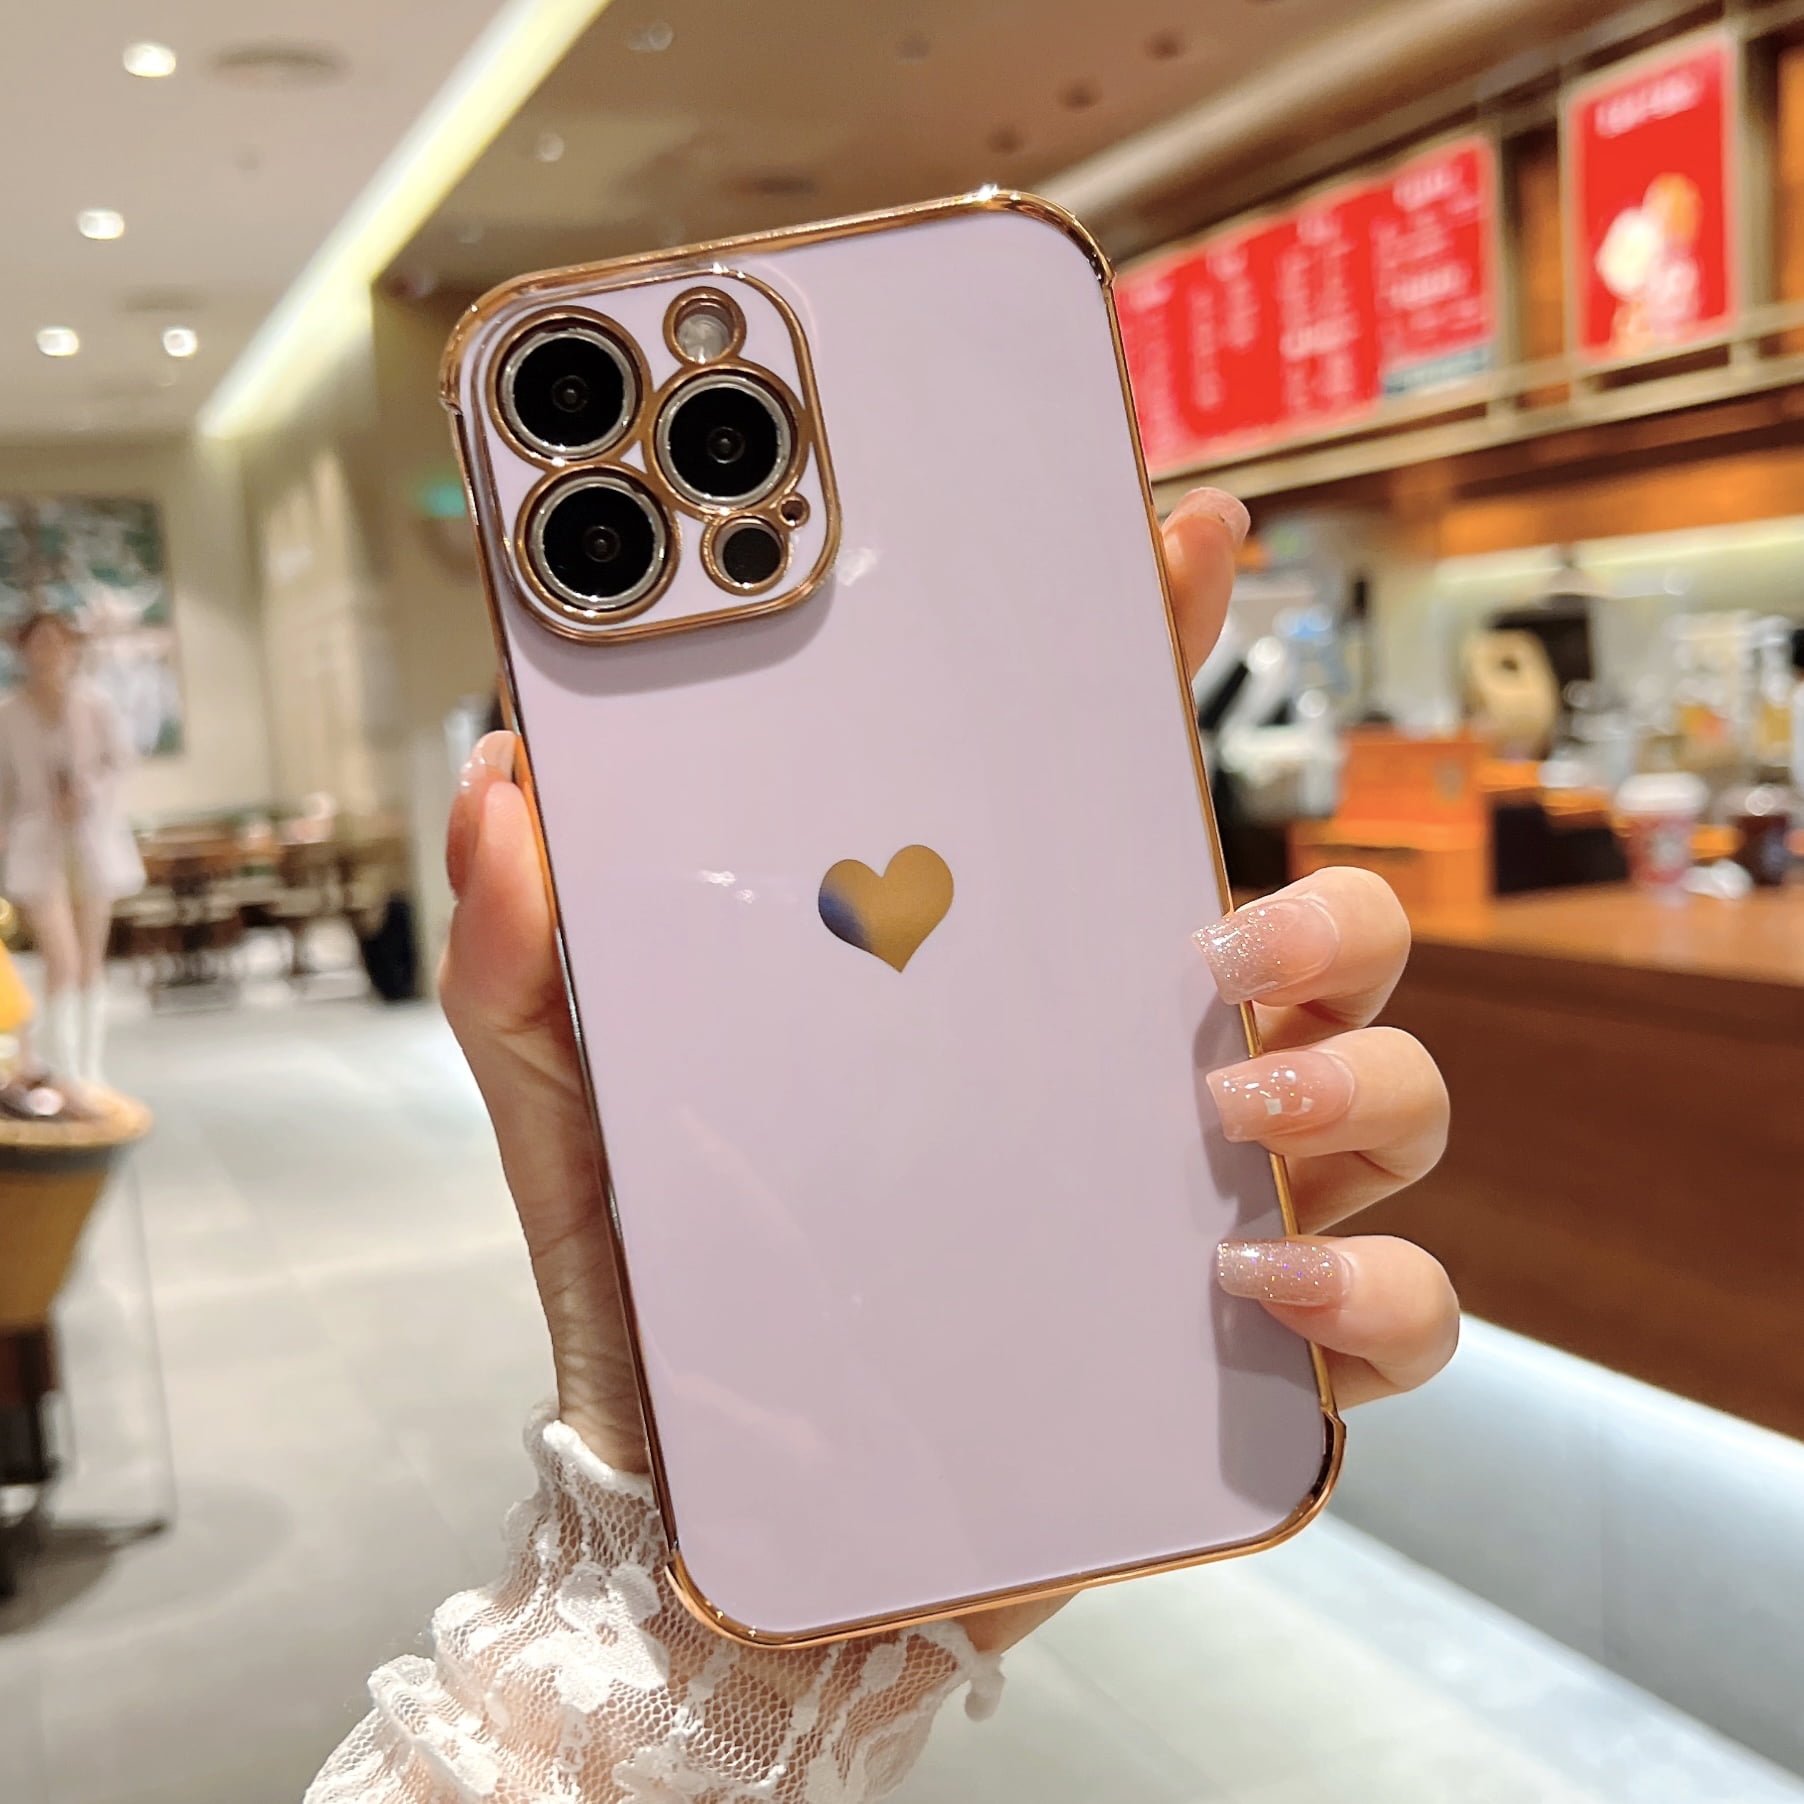 Mionbel for Apple iPhone 12 Pro (6.1 inch) Cute Love Heart Pattern Phone Case for Women Girls,Compatible with MagSafe Charging,Luxury Plating Edge Soft